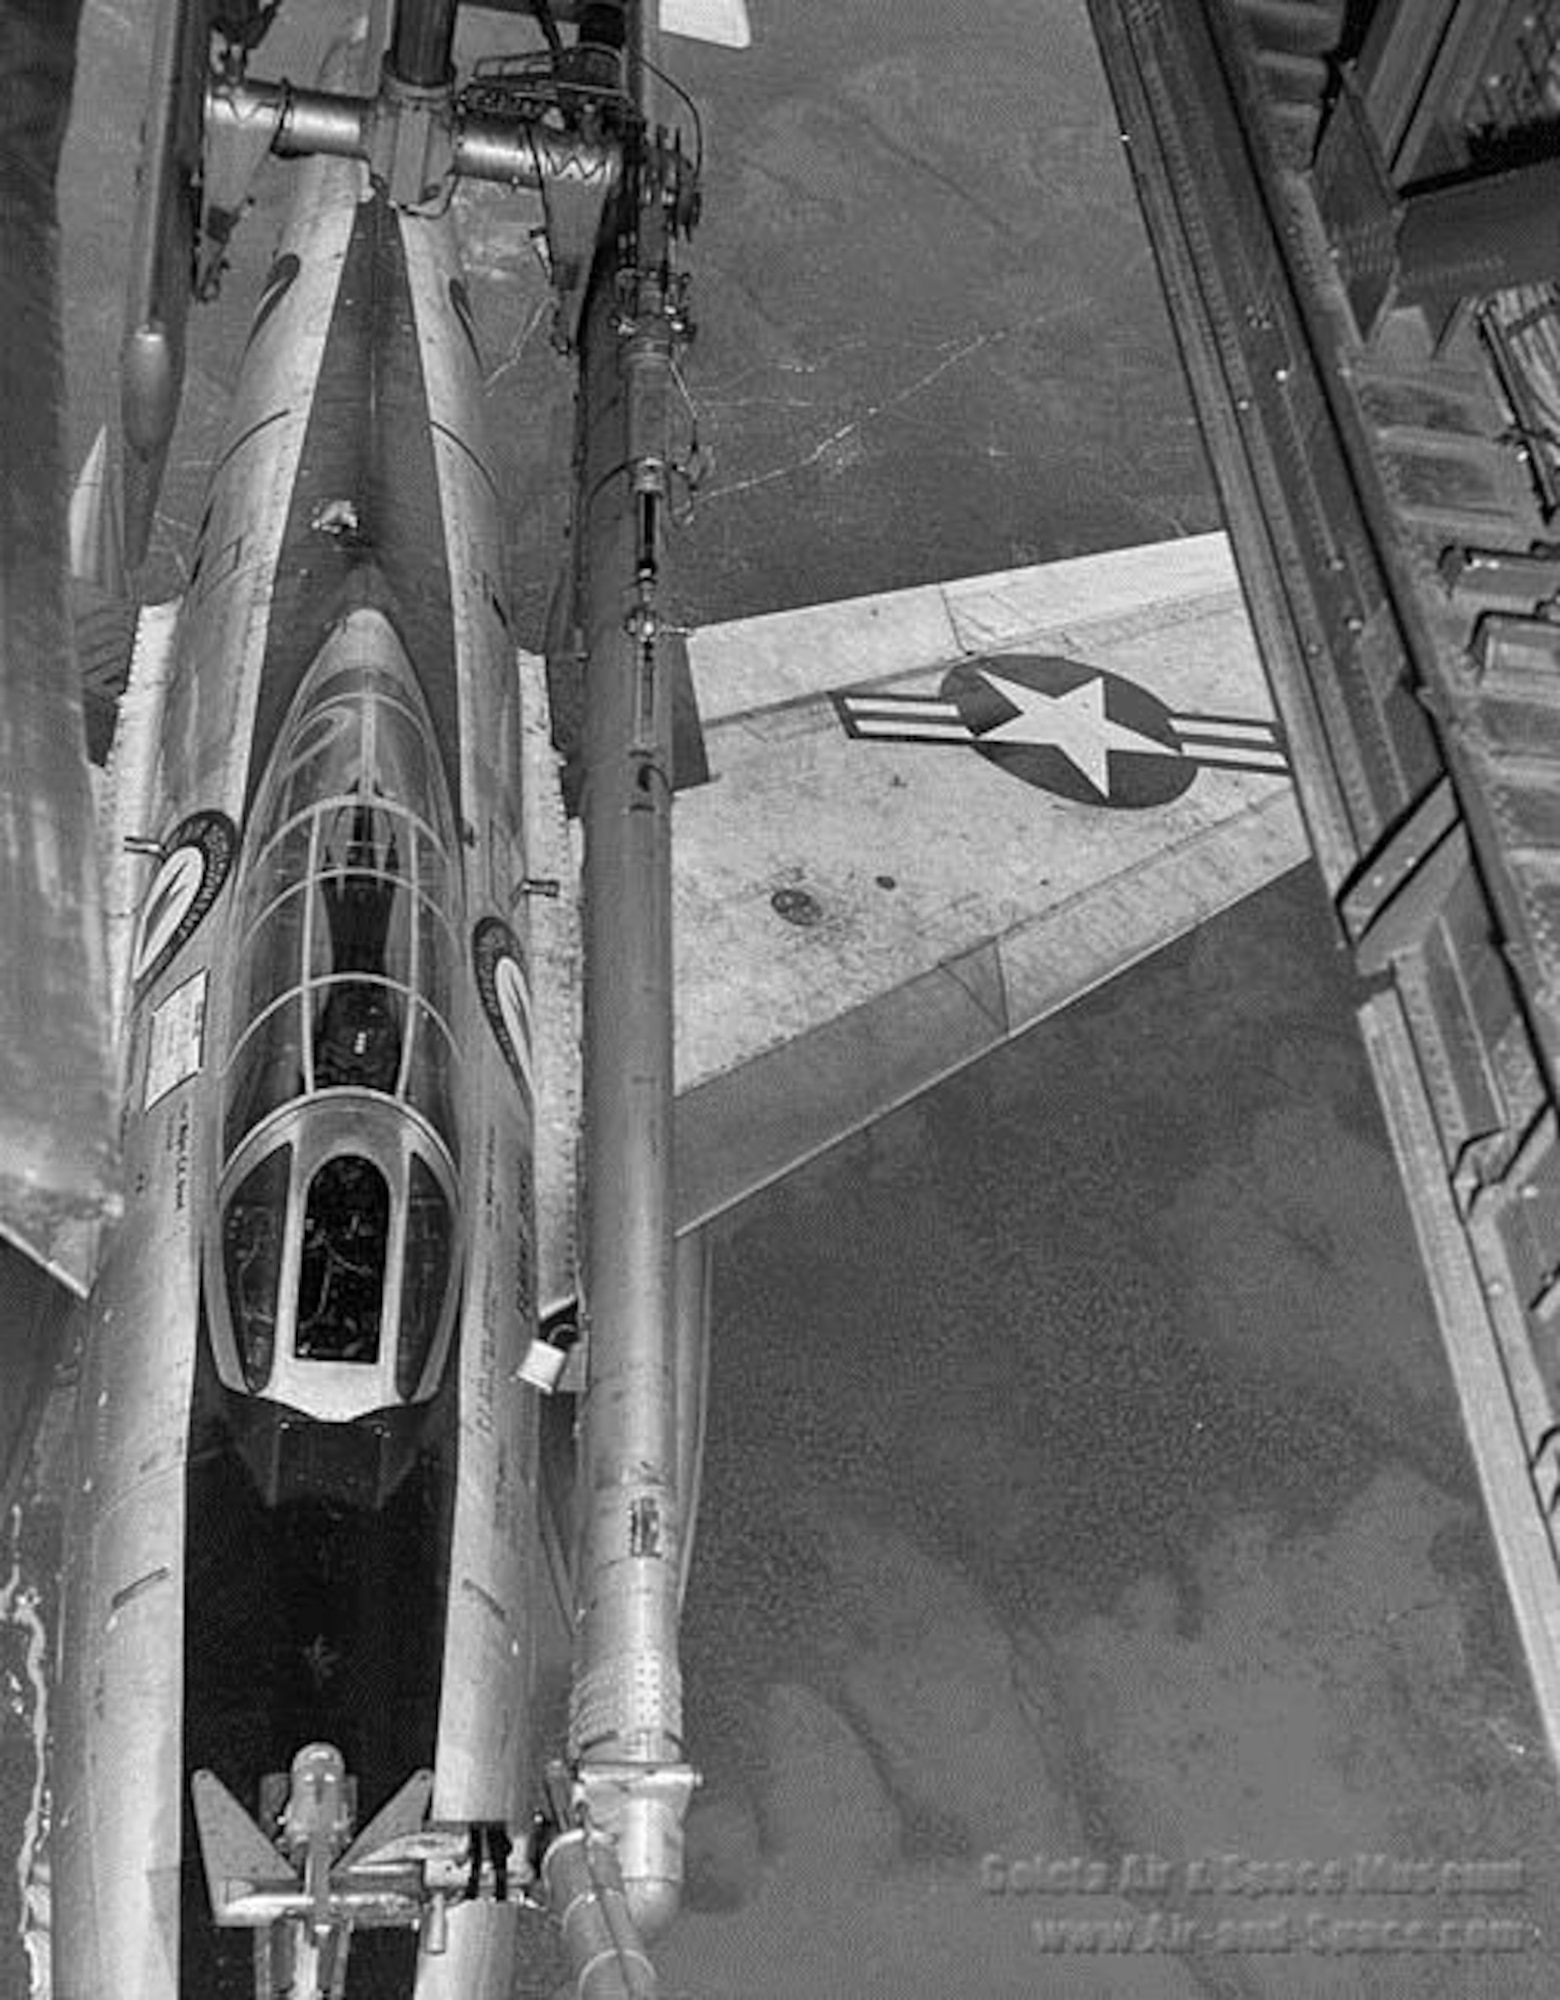 Retrieval up close; lookout from the GRB-36D Peacemaker bomb bay. (U.S. Air Force photo)